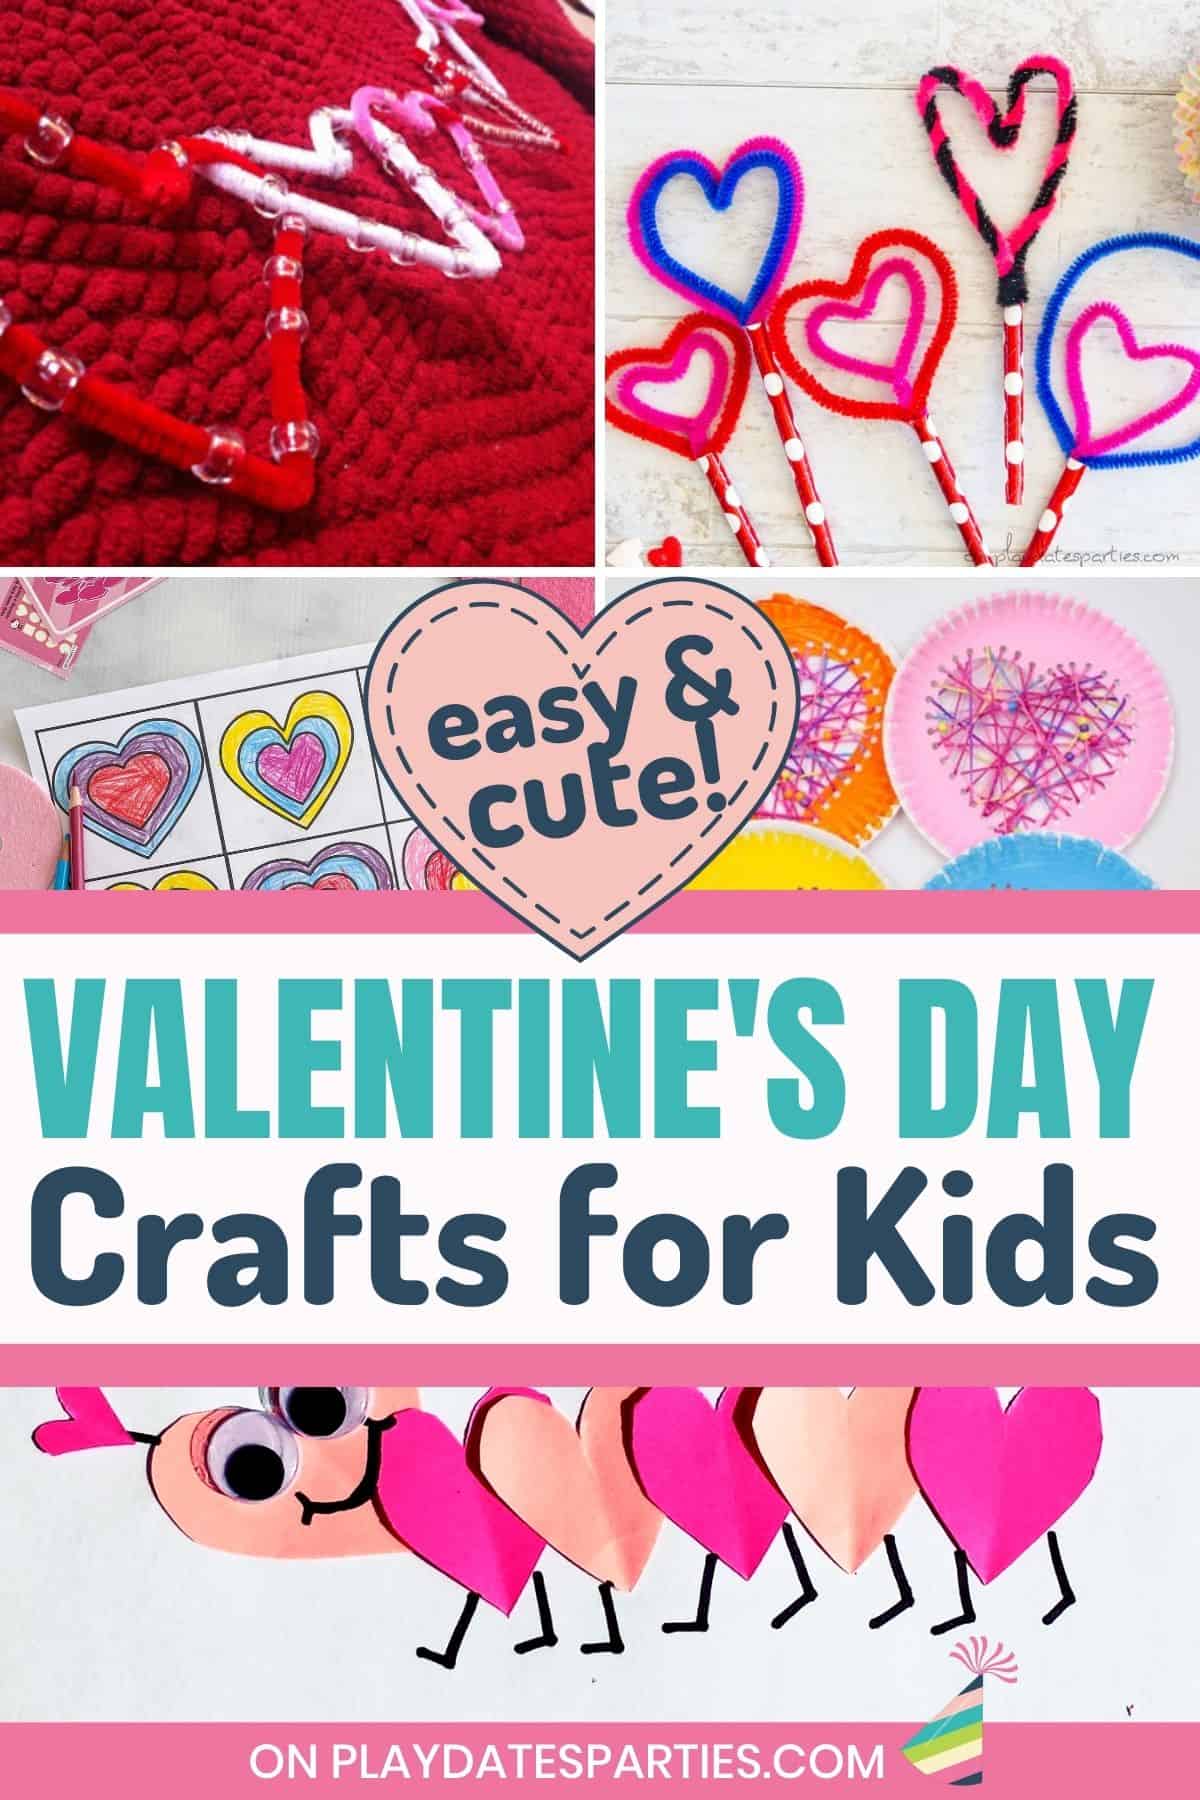 Collage of heart shaped Valentine's Day crafts for kids.